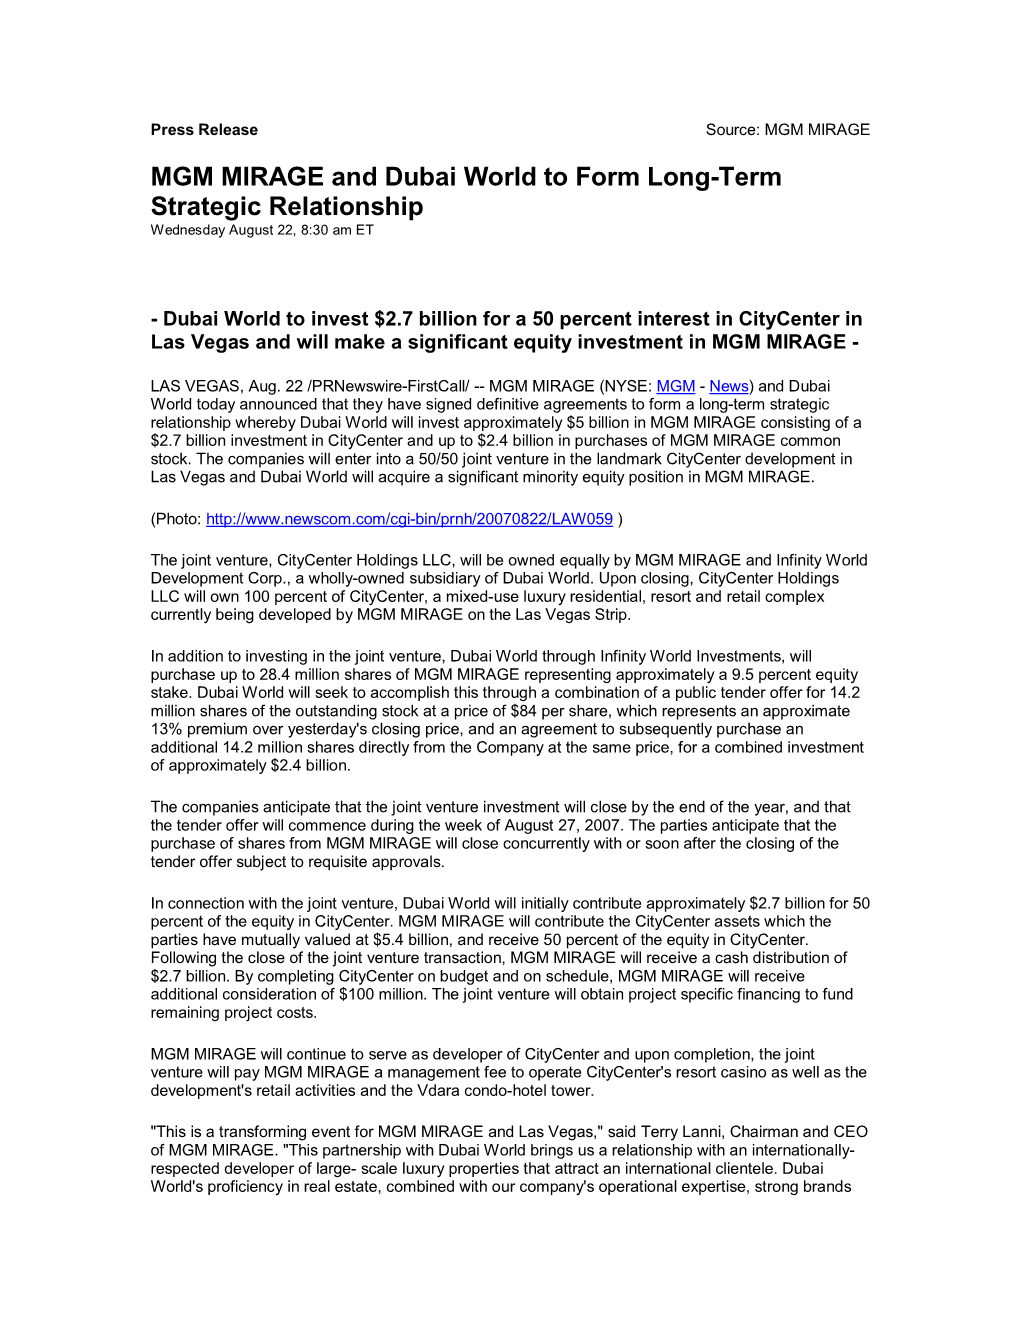 MGM MIRAGE and Dubai World to Form Long-Term Strategic Relationship Wednesday August 22, 8:30 Am ET